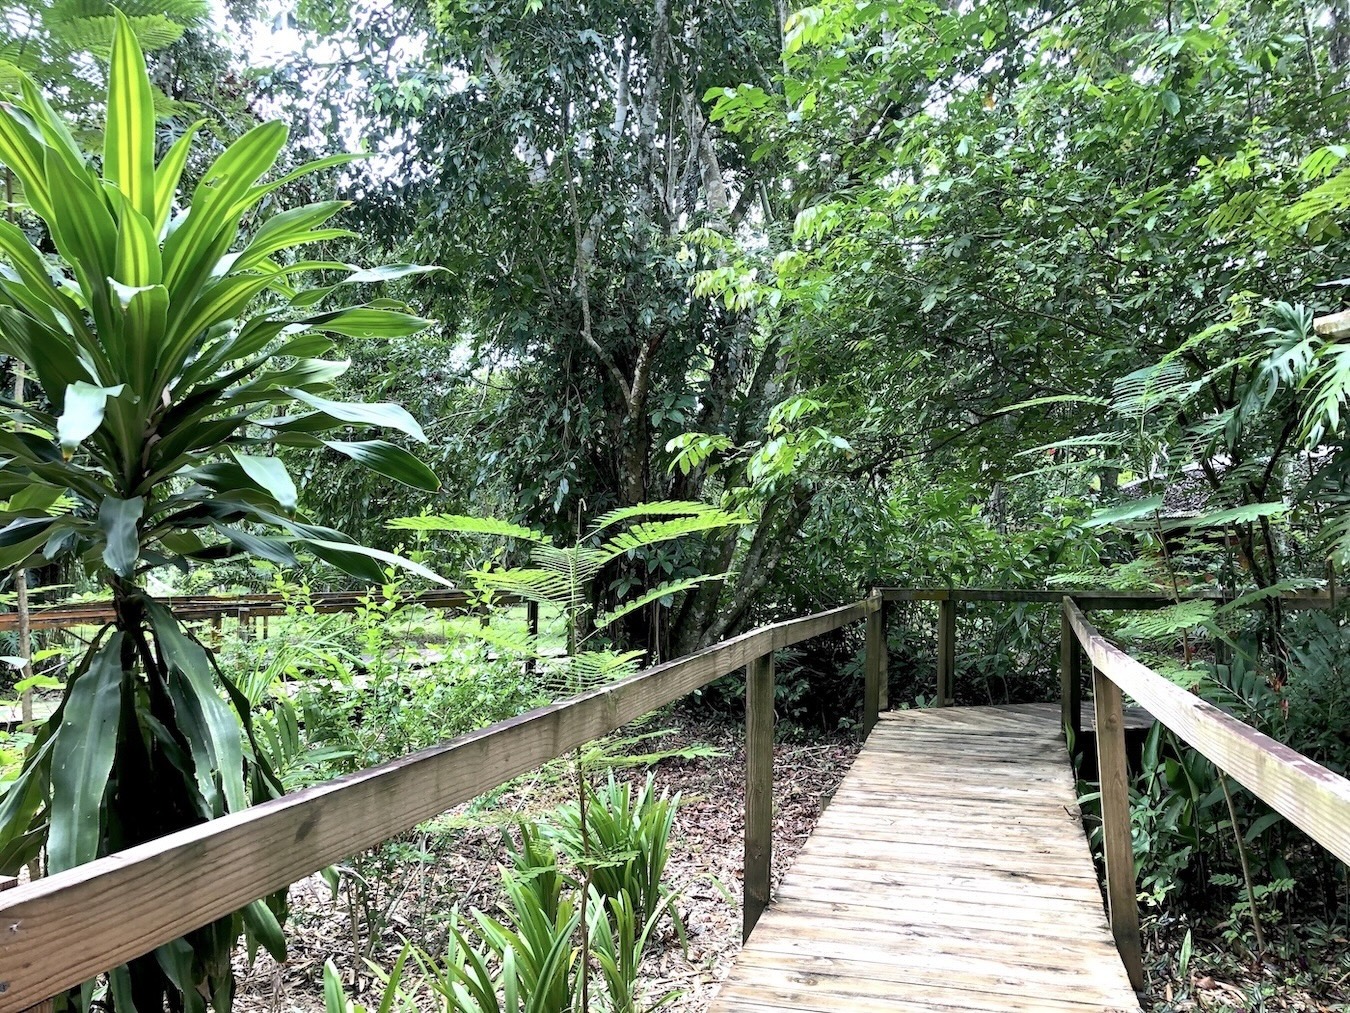 Wooden walkway connects to the cabins and the river filled swimming pool.